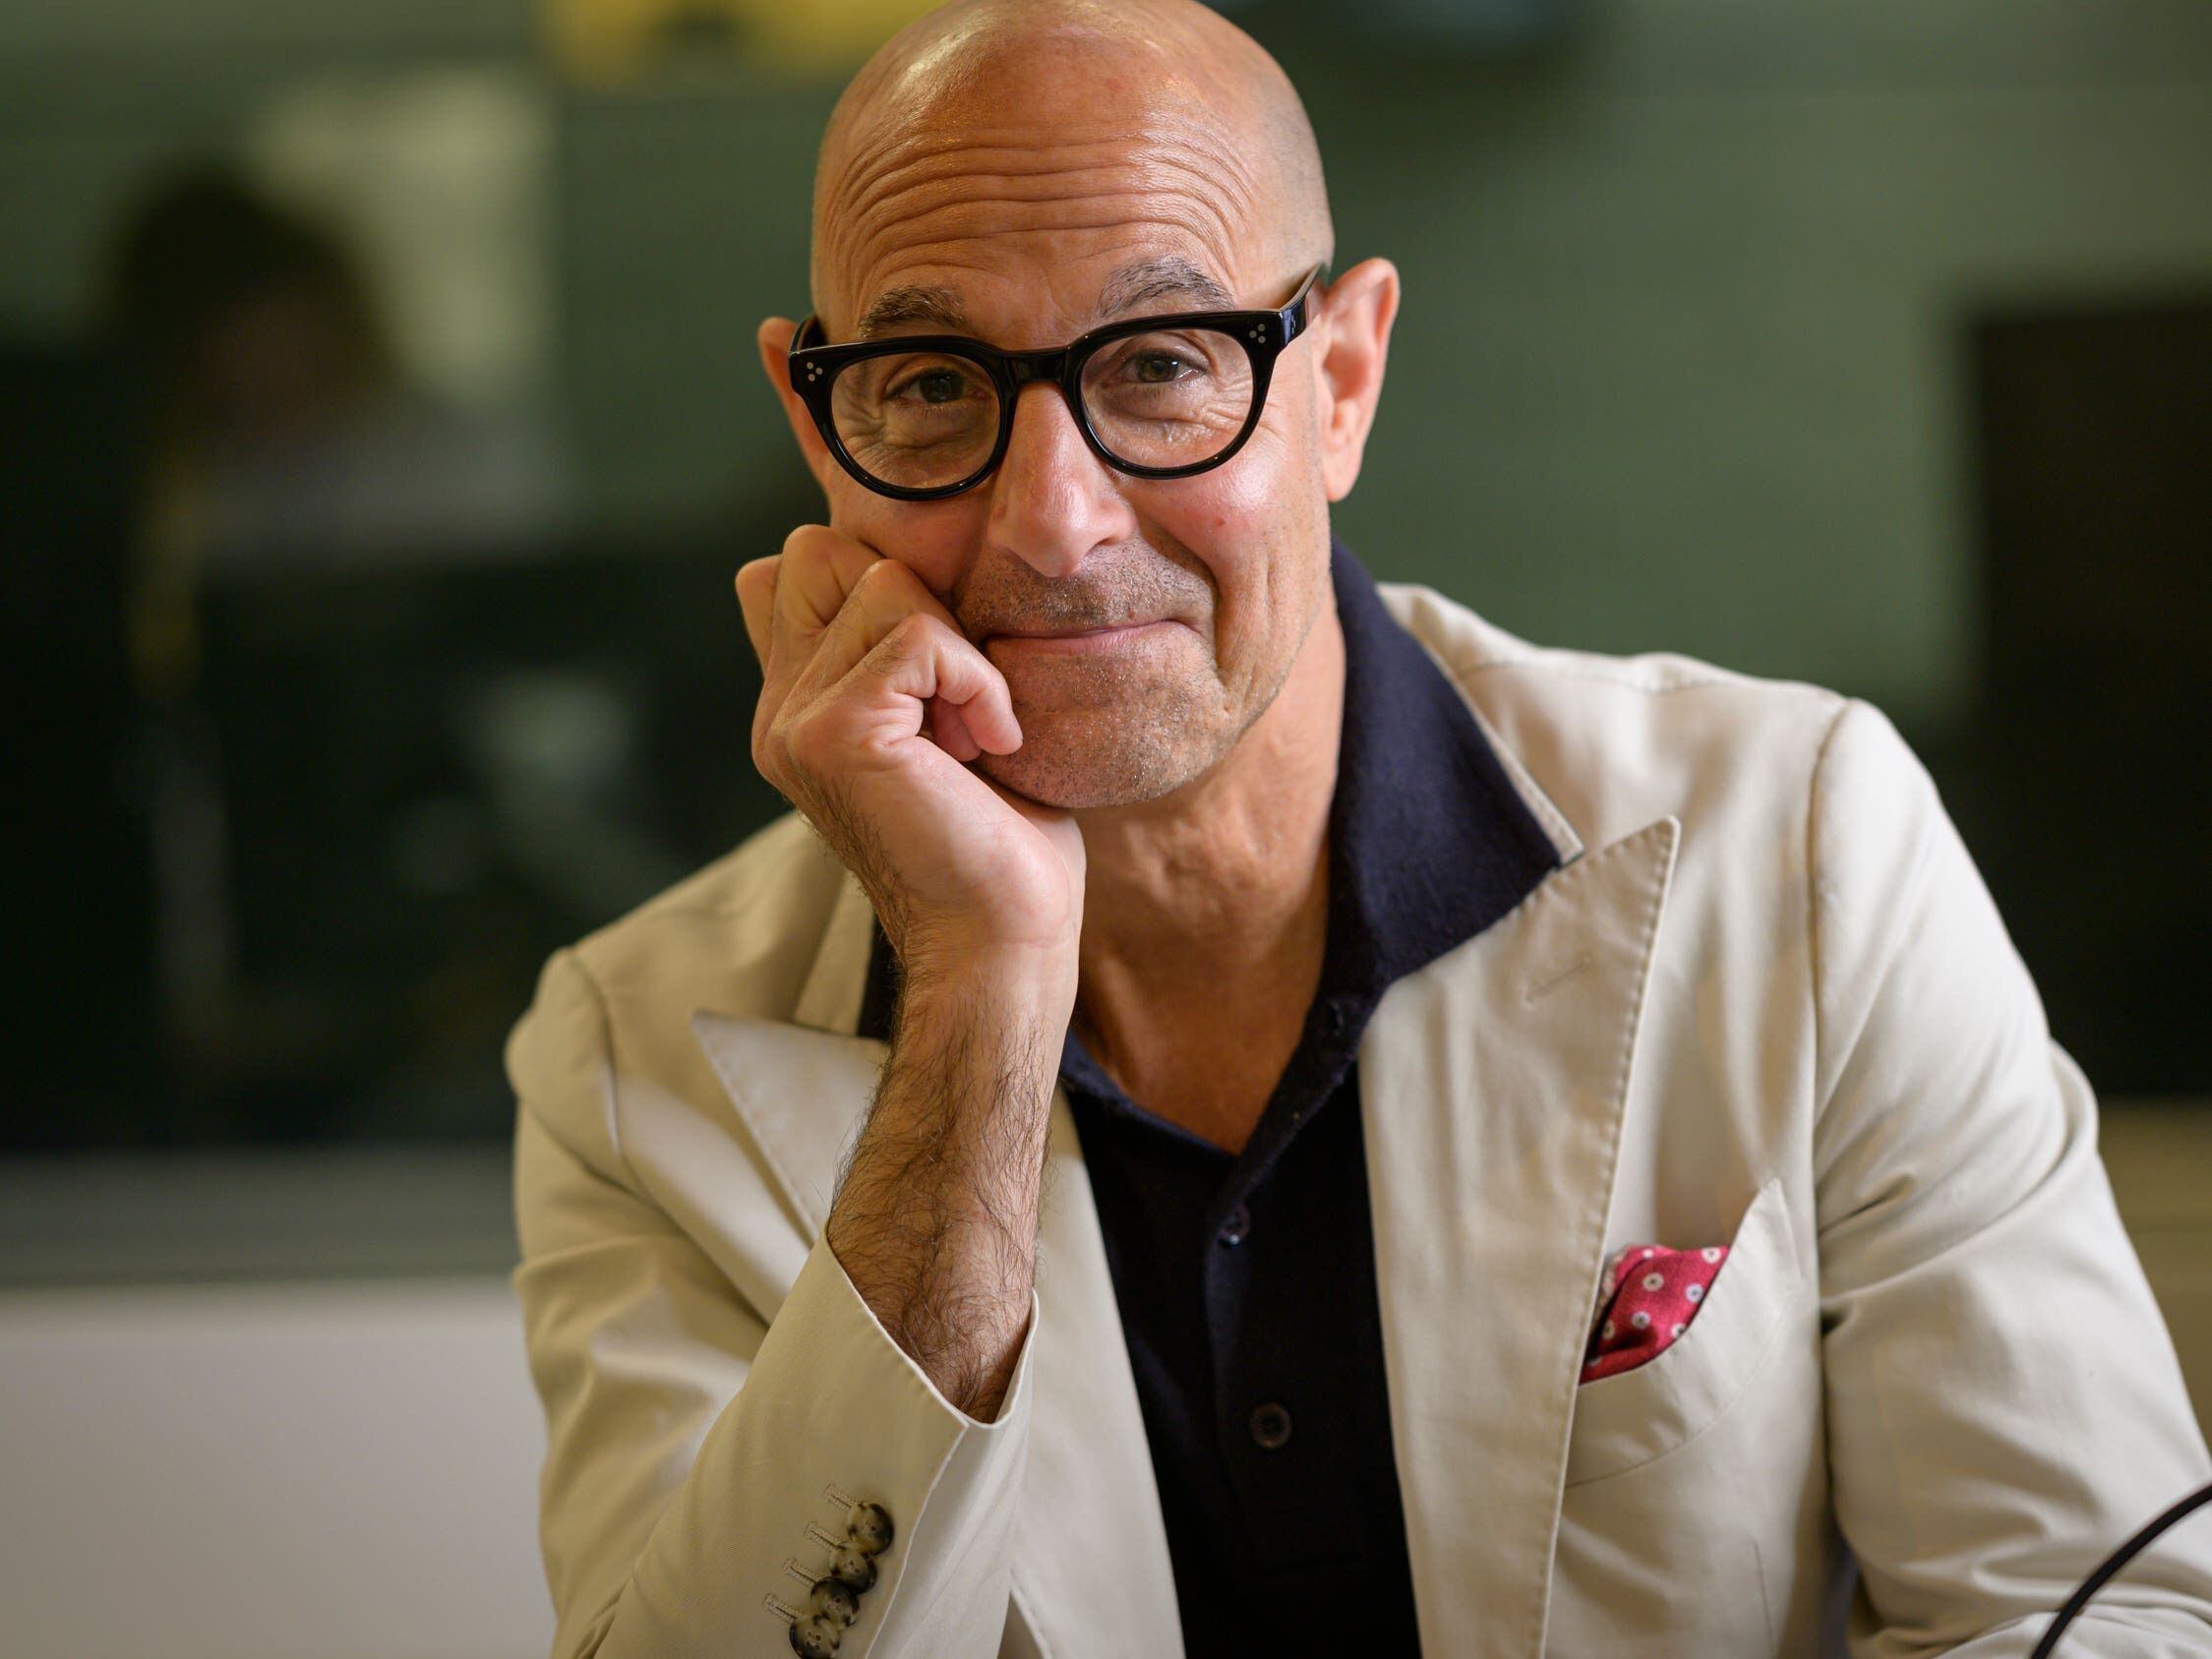 Stanley Tucci weighs in on straight actors playing gay characters